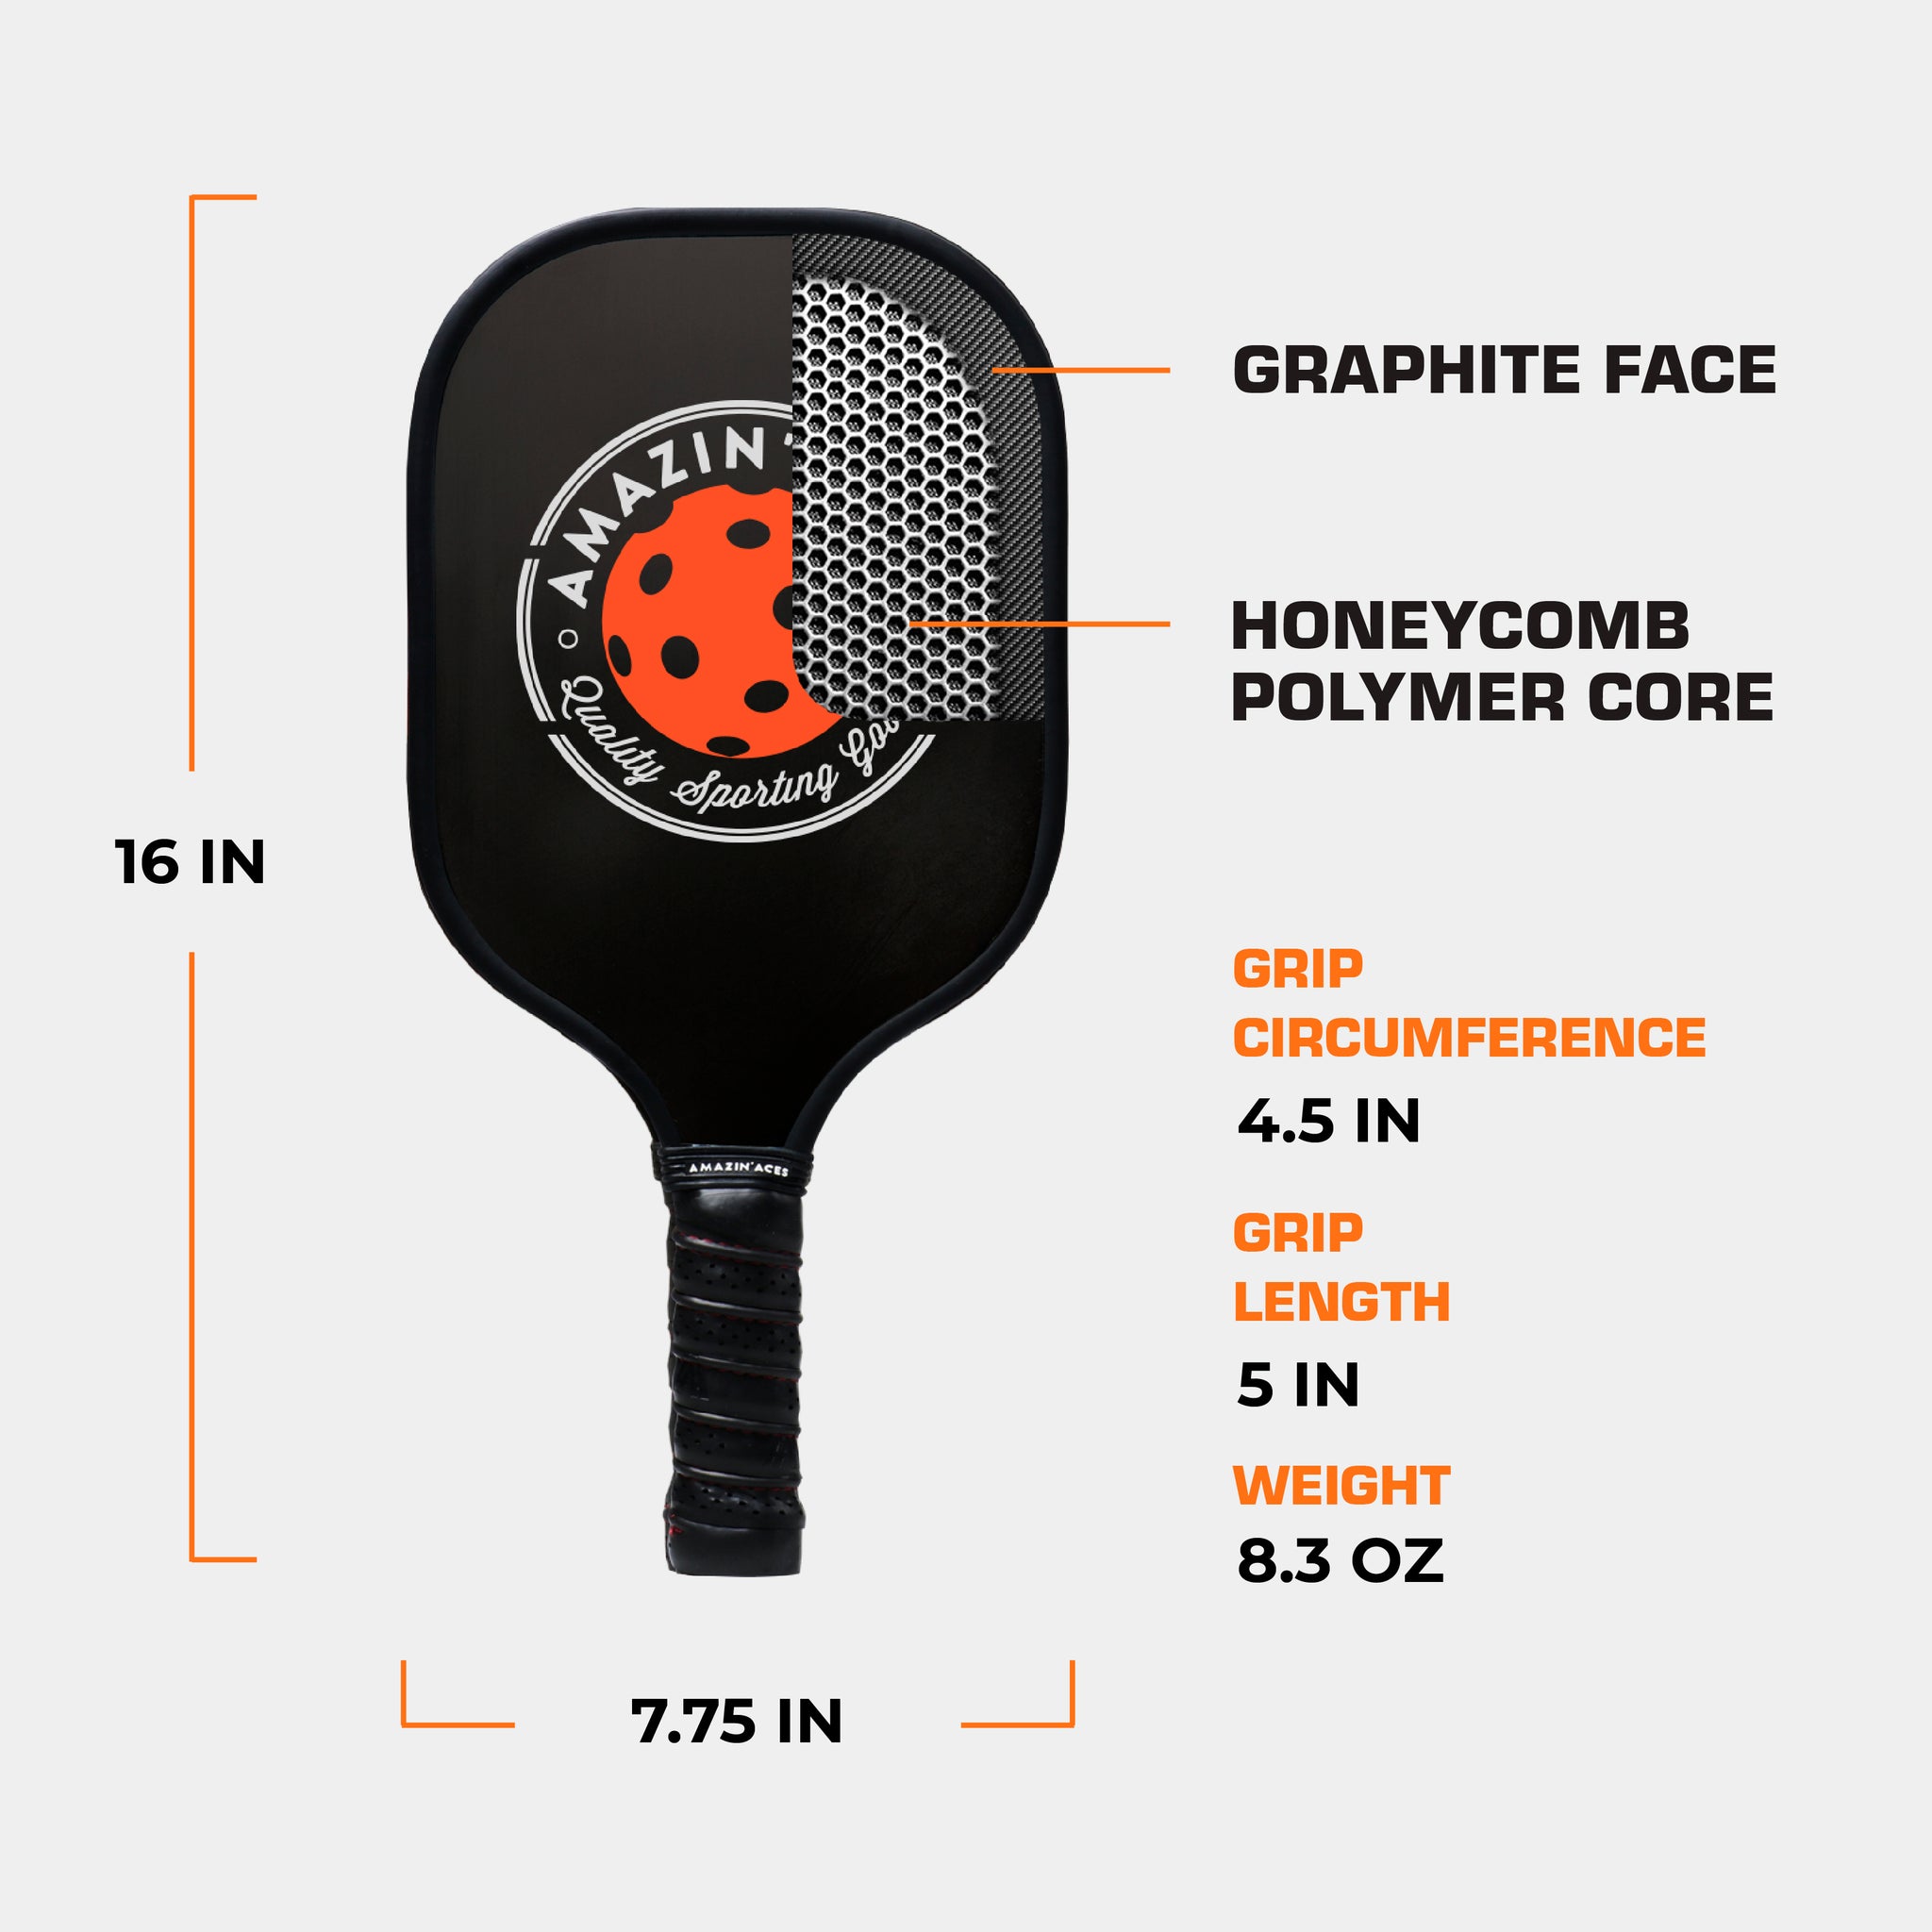 Amazin Aces Classic Graphite Pickleball Paddle Pack of 4 - Graphite Face and Honeycomb Polymer Core